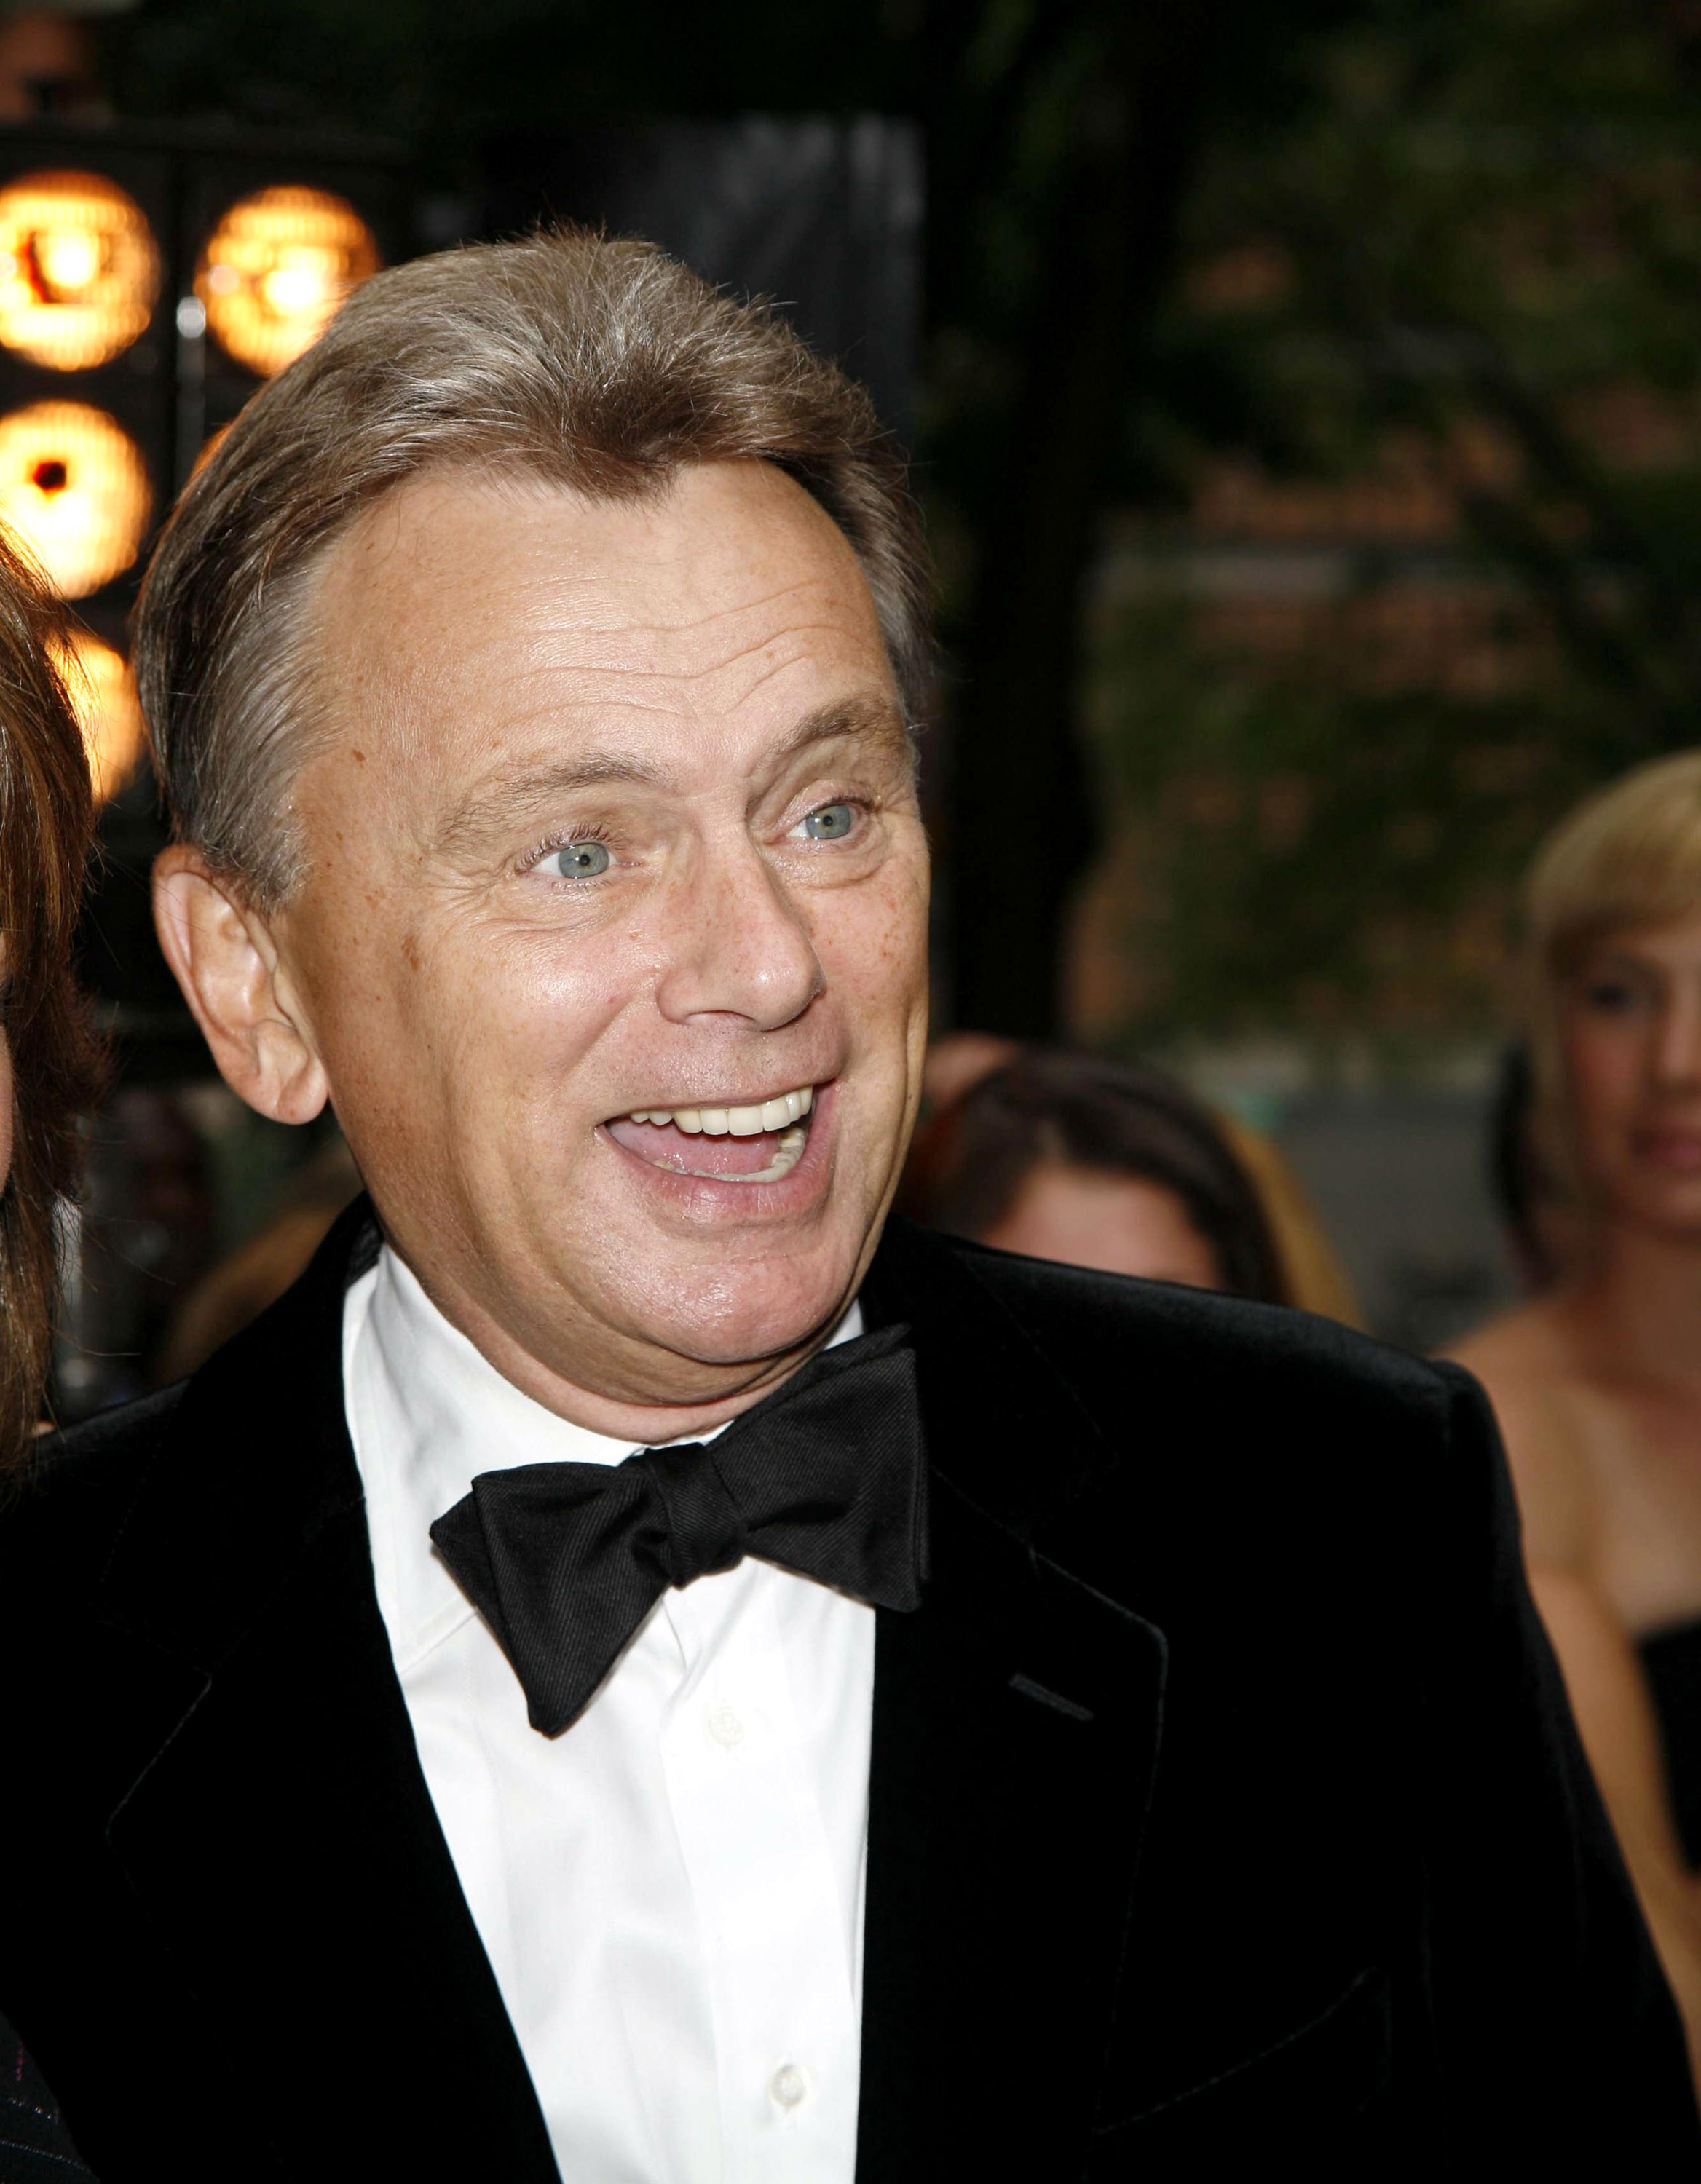 Pat Sajak at ABC-TV Studios in Manhattan in New York City, United States | Source: Getty Images